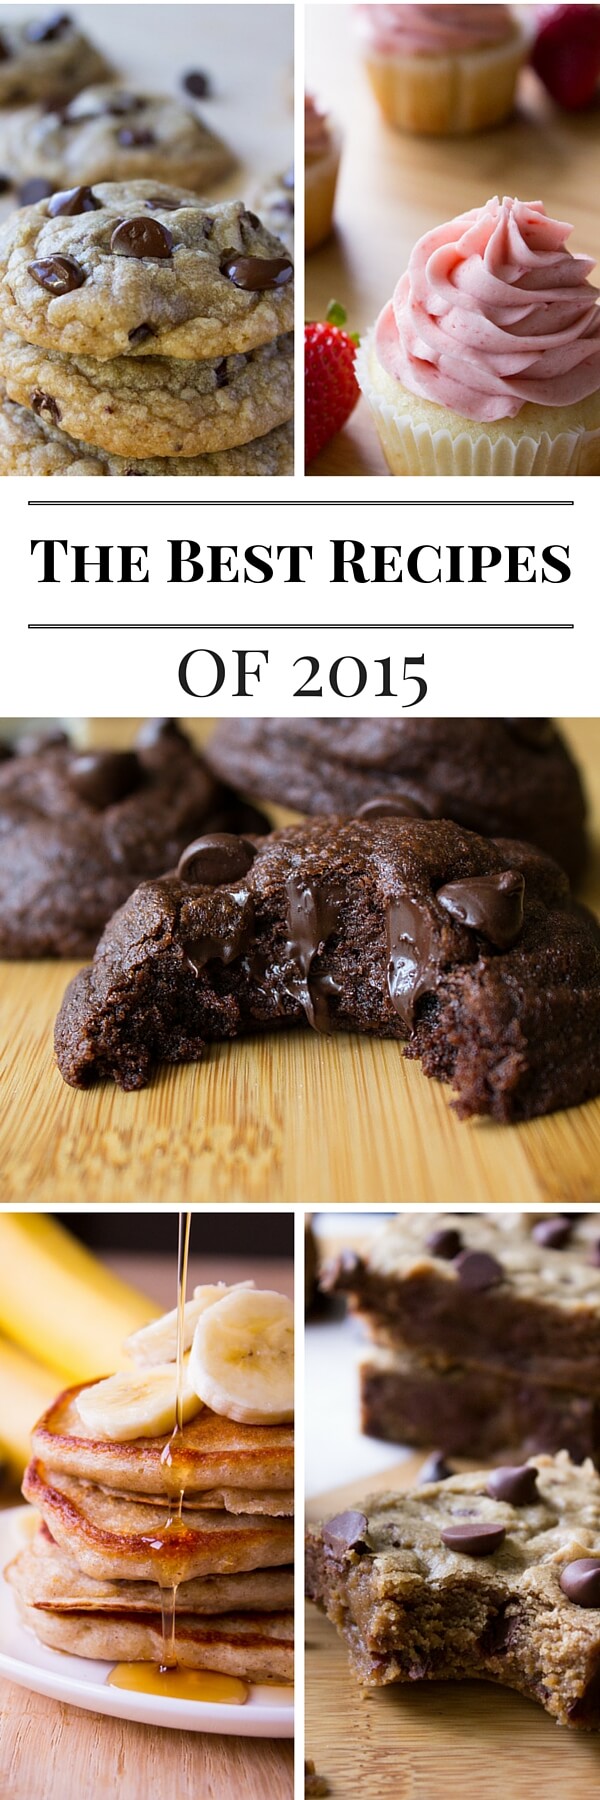 Cookies, Bars, Breakfasts.... And of Course Lots of Chocolate. Check out the top 10 recipes from Just So Tasty in 2015